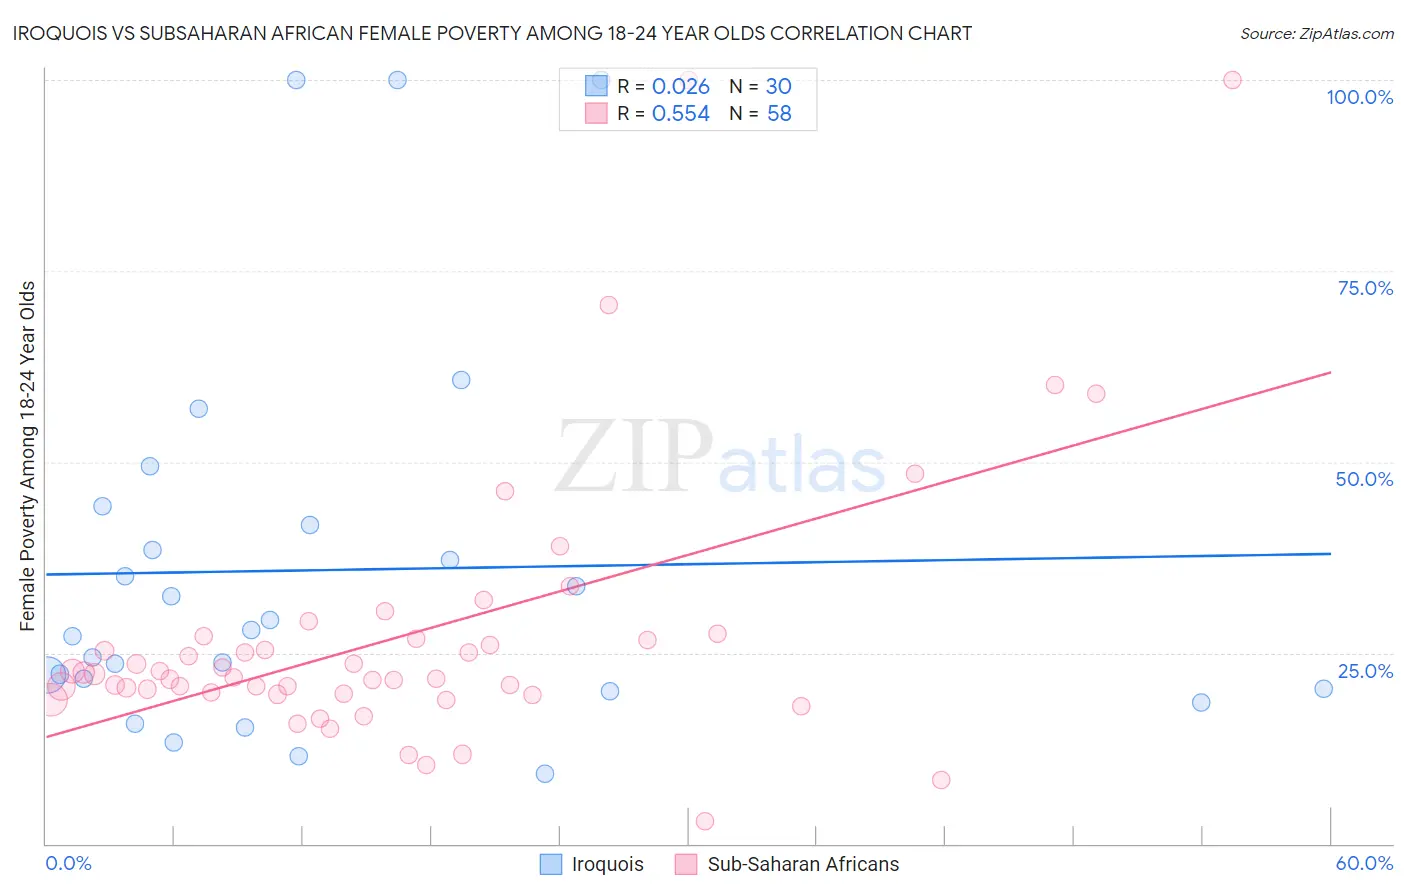 Iroquois vs Subsaharan African Female Poverty Among 18-24 Year Olds